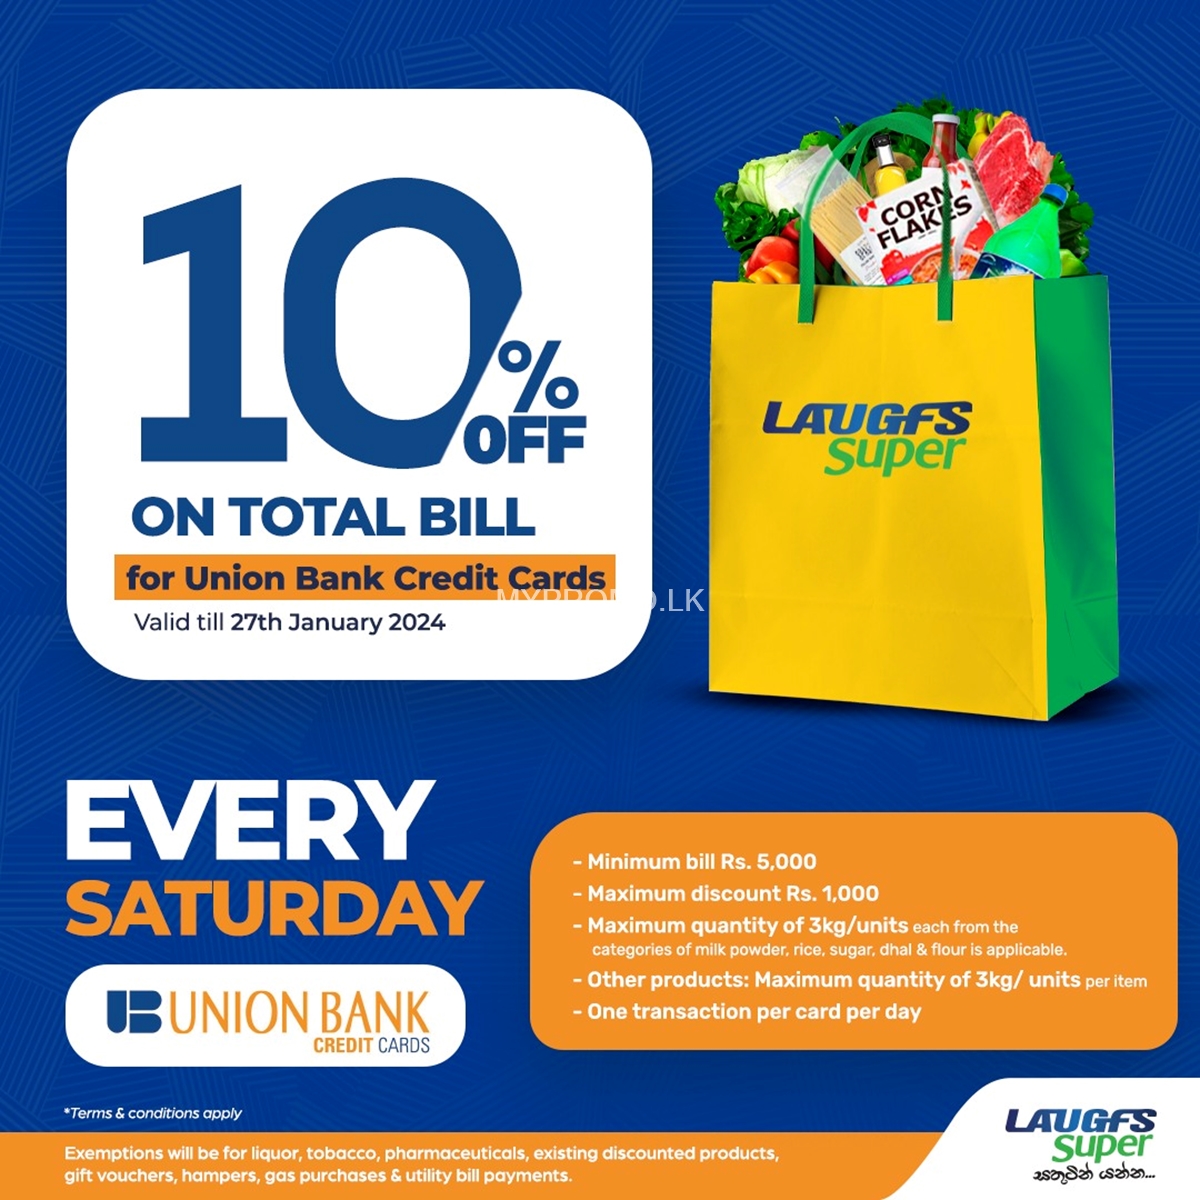 10% Off on Total Bill for Union Bank Credit Cards at LAUGFS Supermarket